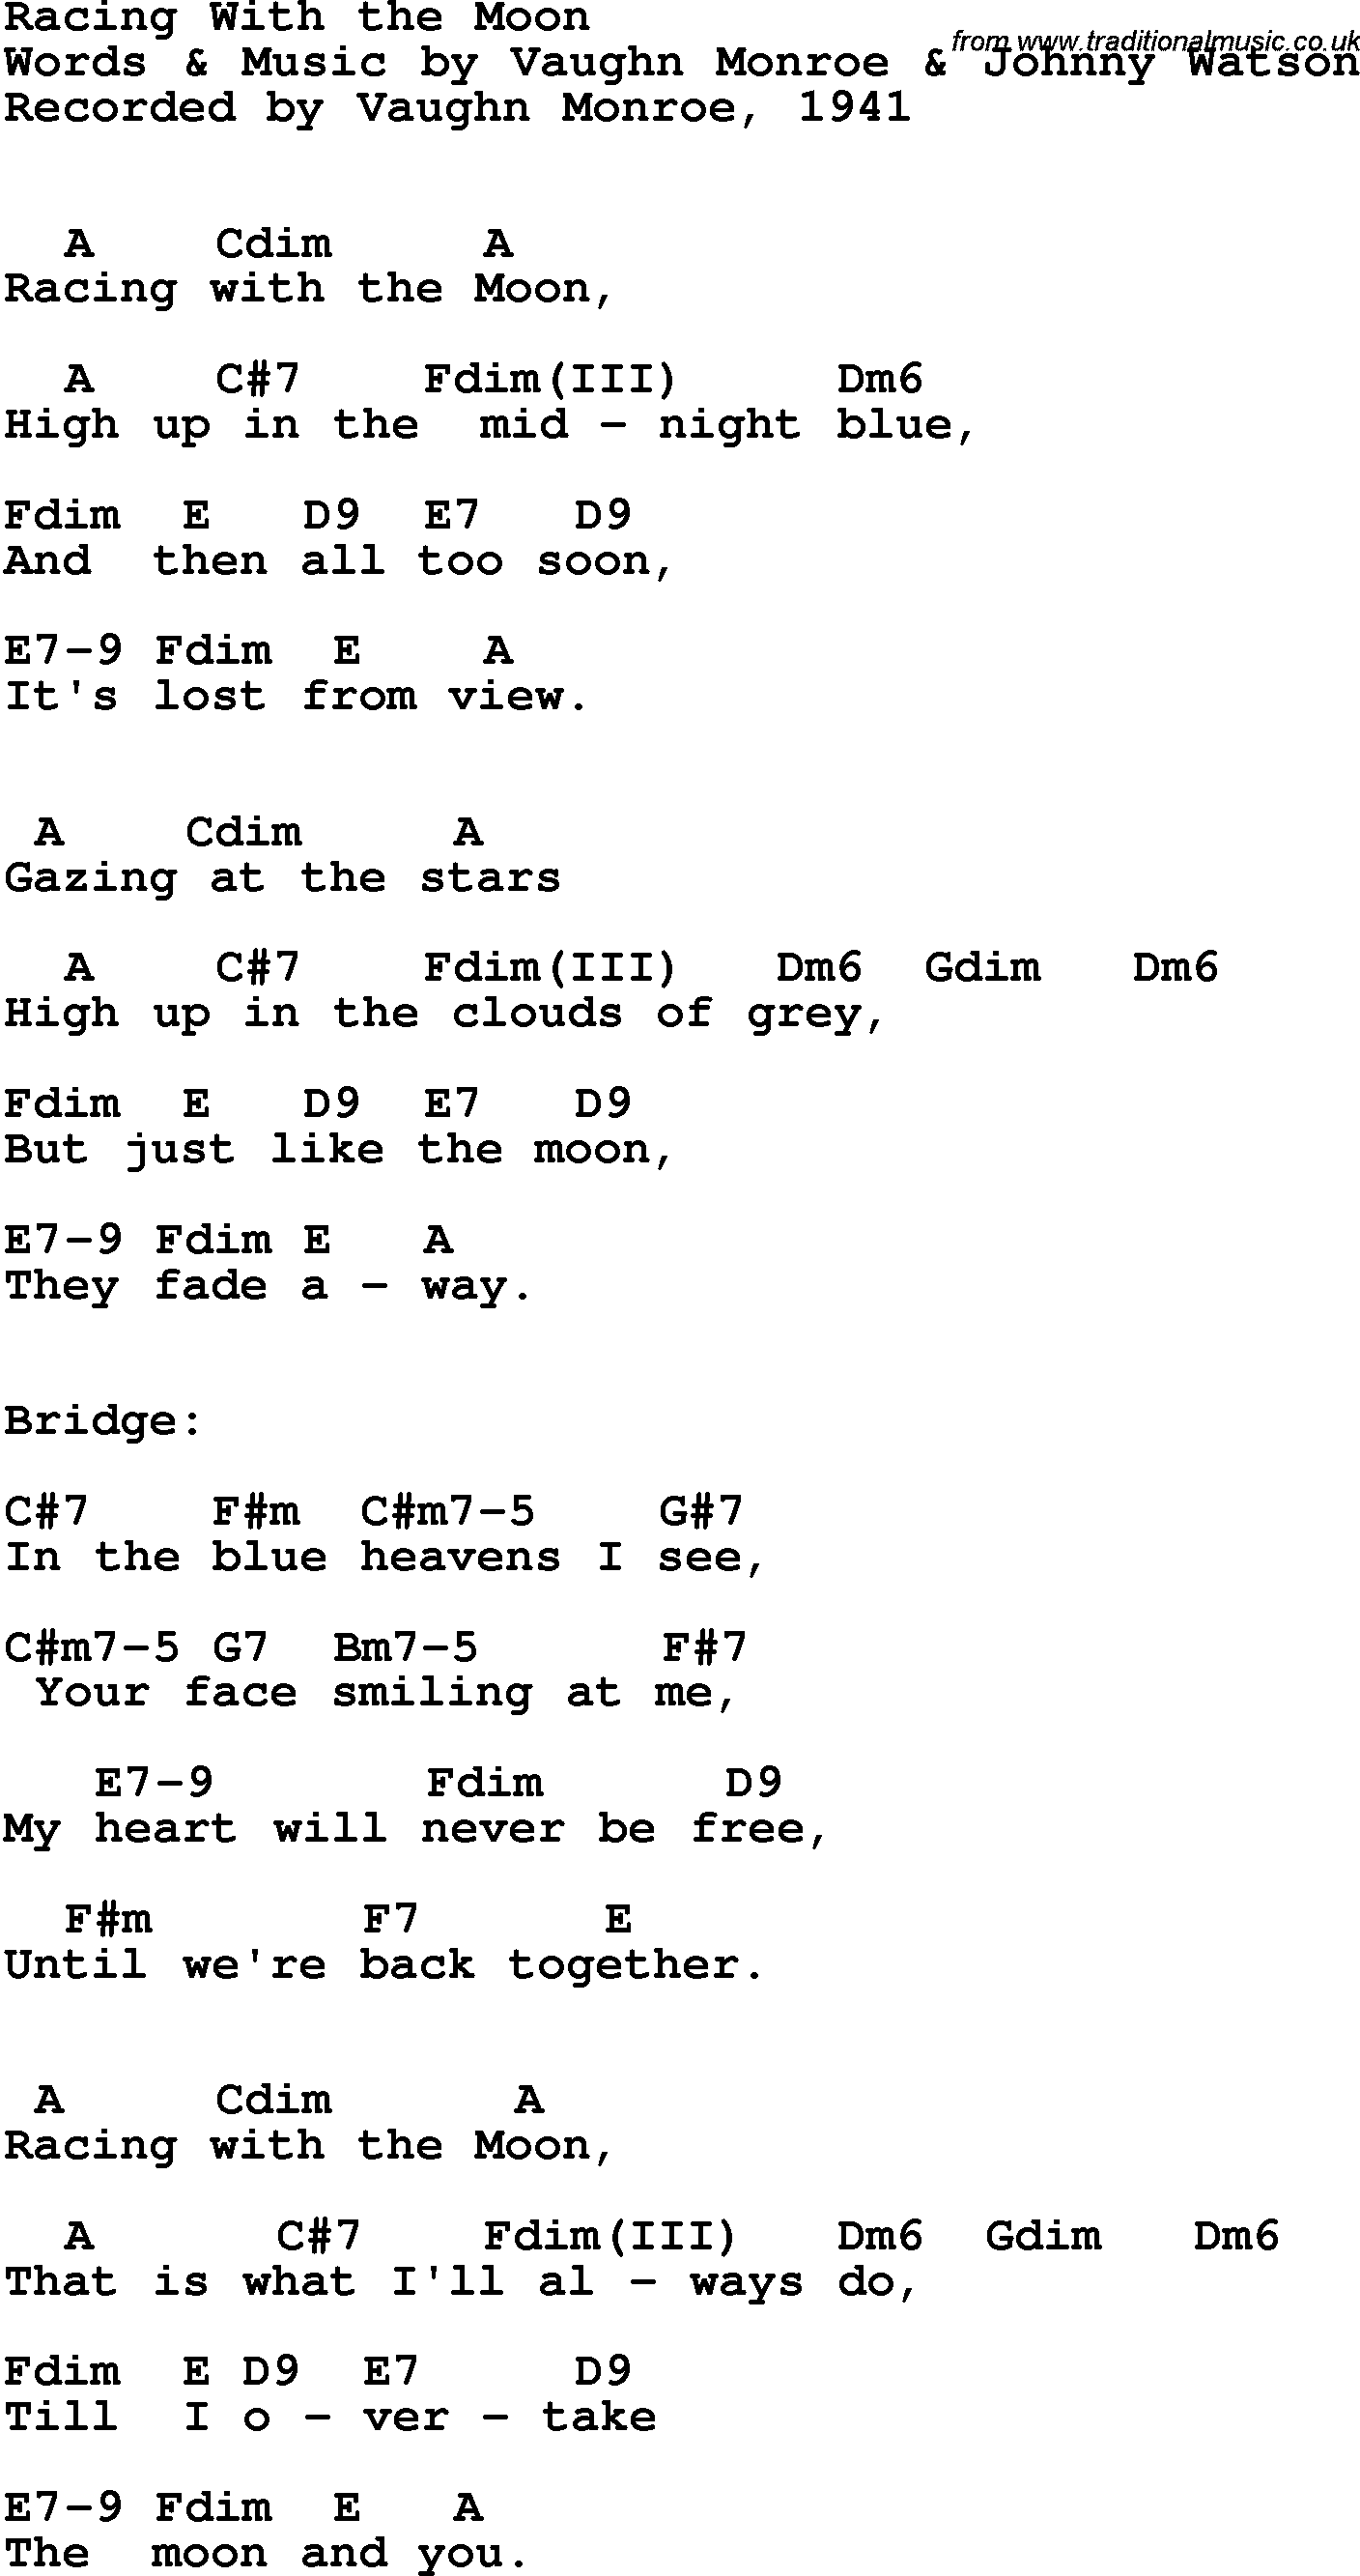 Song Lyrics with guitar chords for Racing With The Moon - Vaughn Monroe, 1941